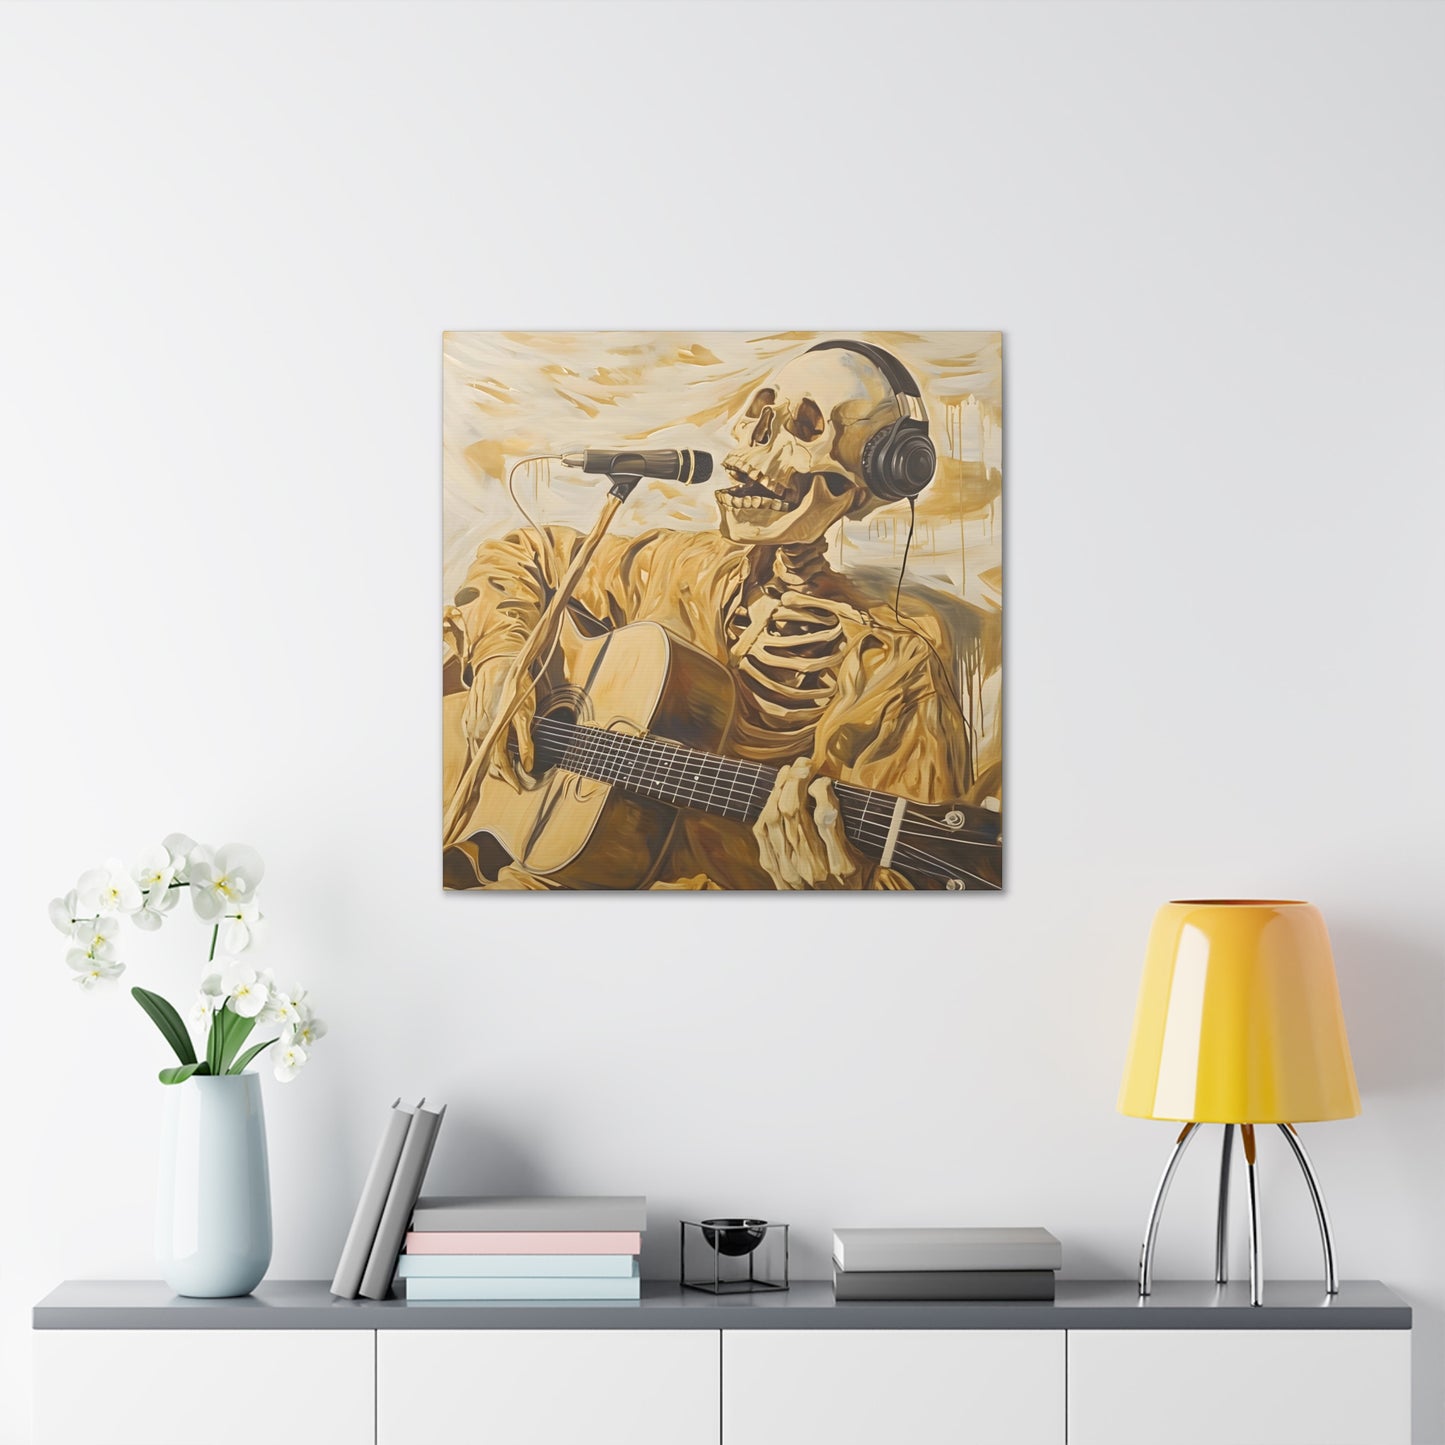 in situ 2 depicting a skeleton singing into a microphone, embodying music's redemptive power, inspired by 'American Pie' lyrics, with golden tones symbolizing music's sanctity